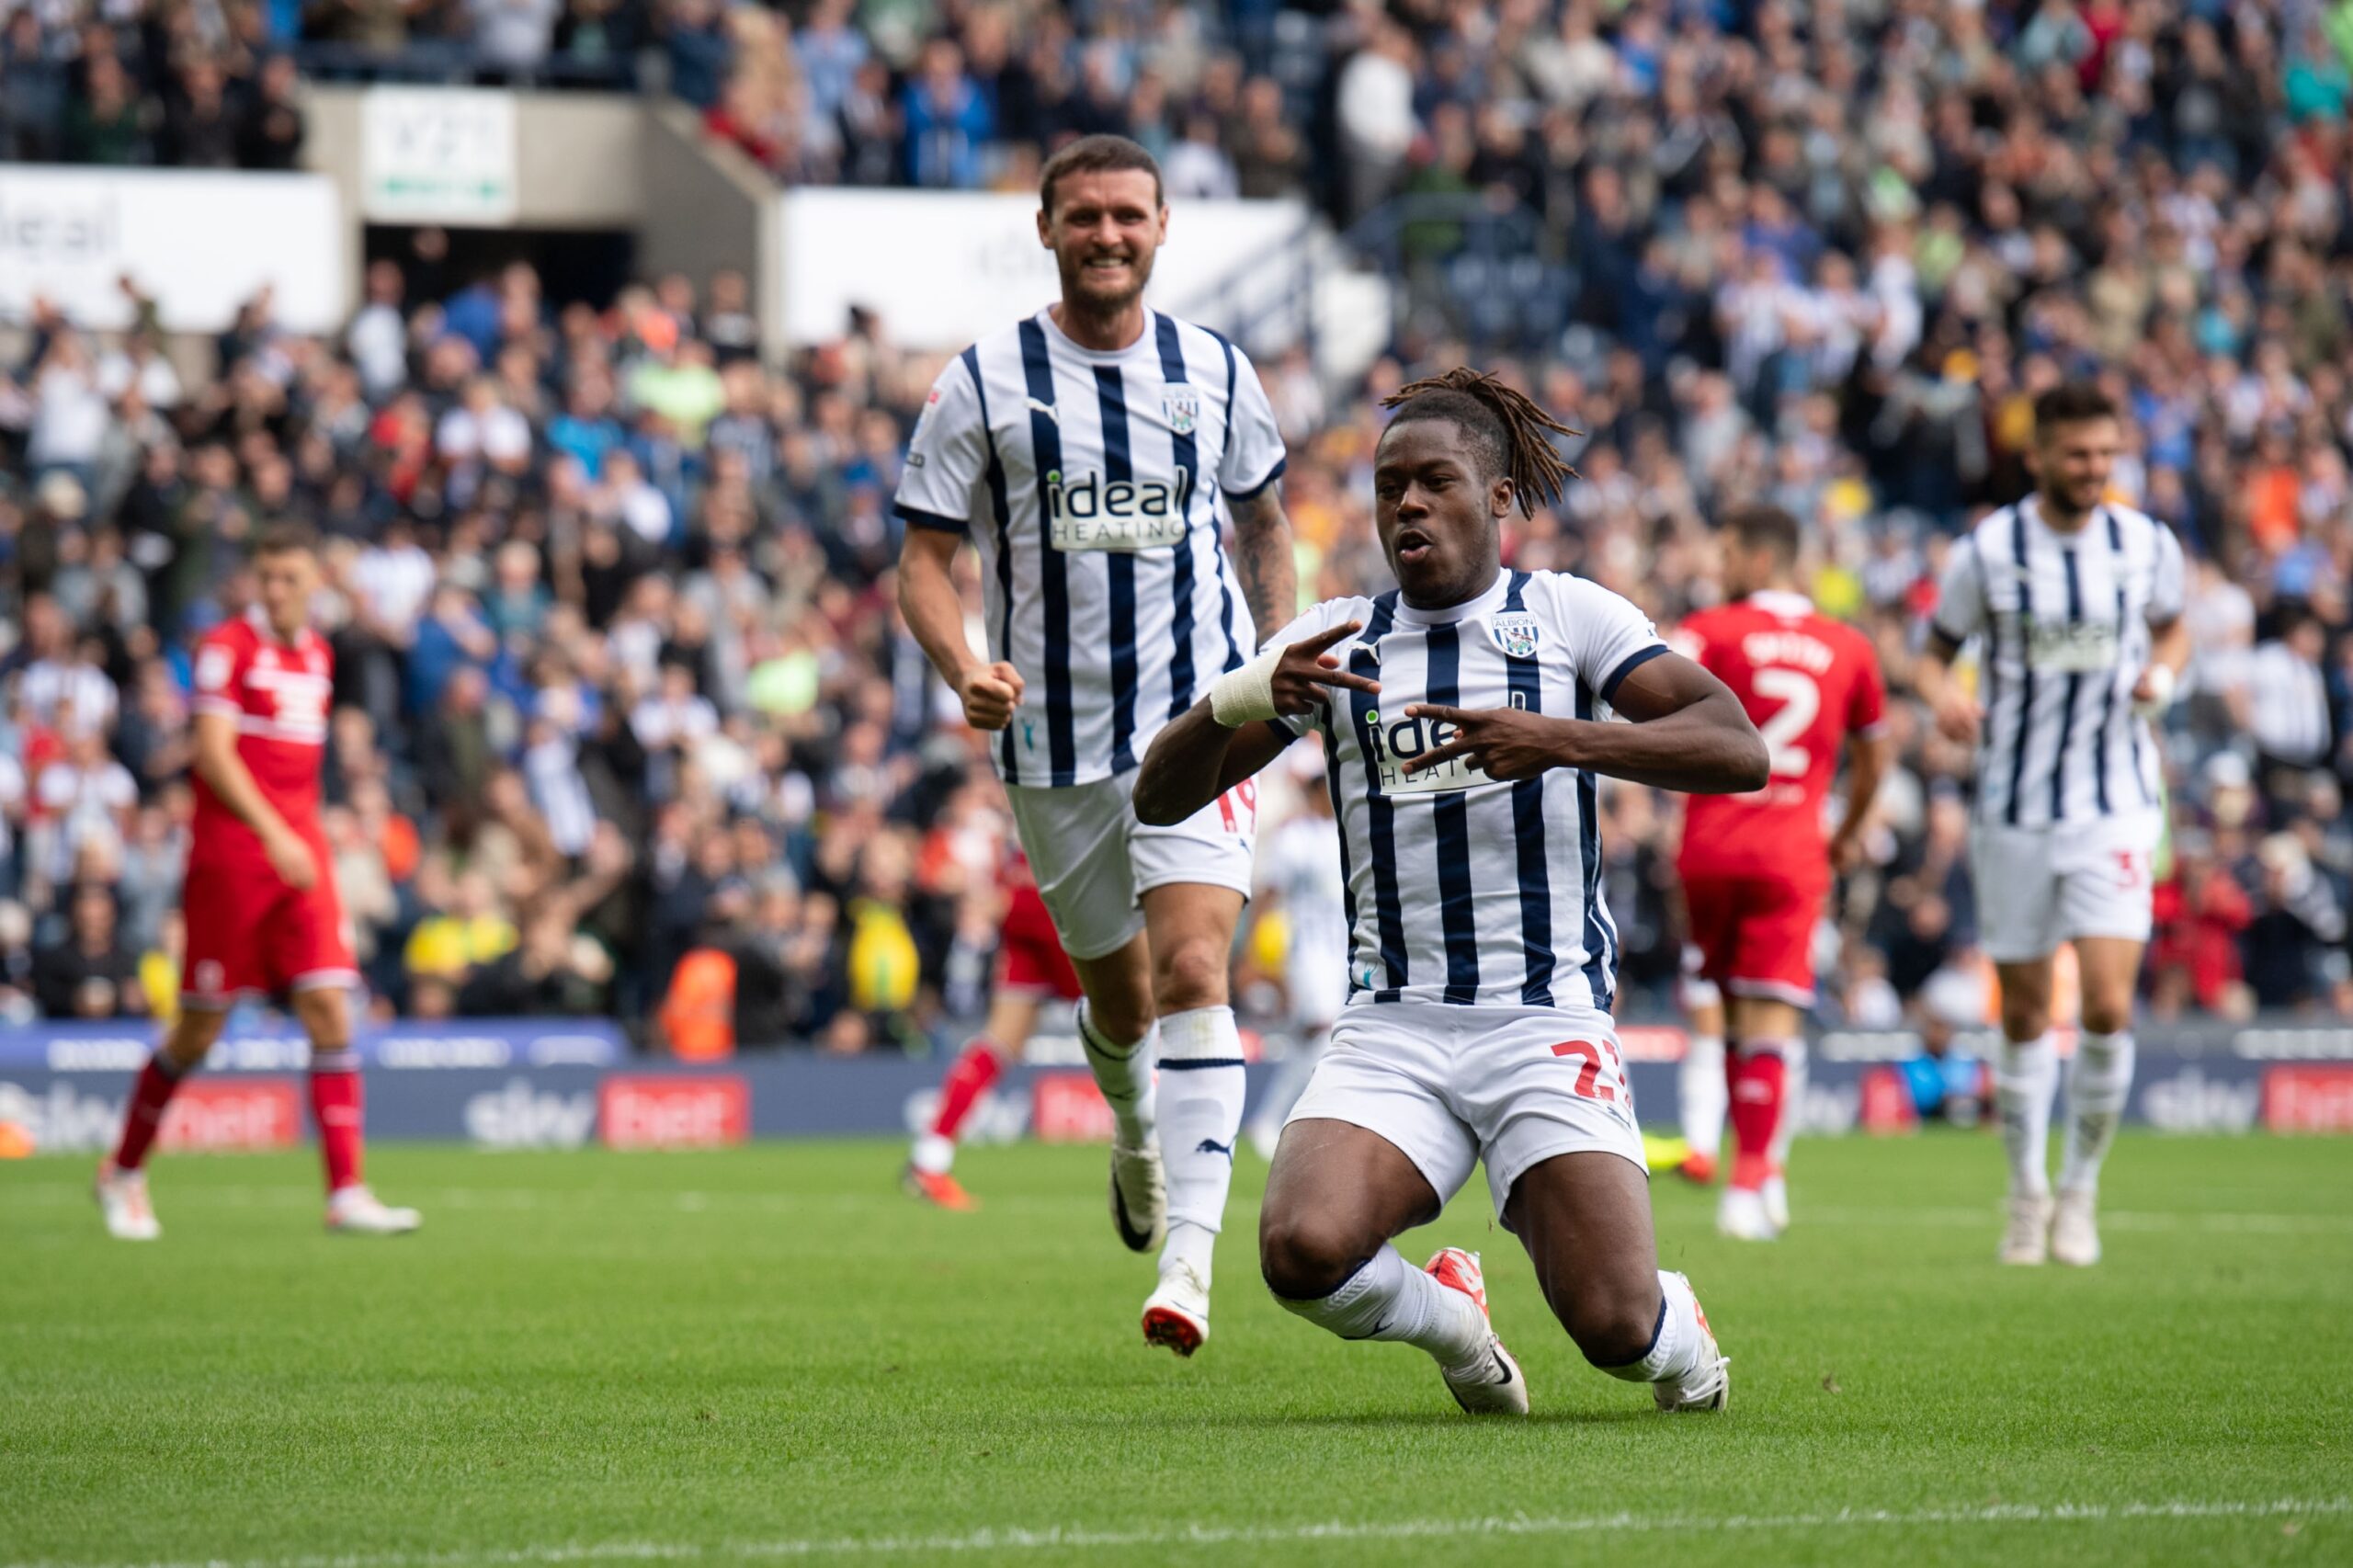 Brandon Thomas-Asante scores in West Brom’s win against Middlesbrough